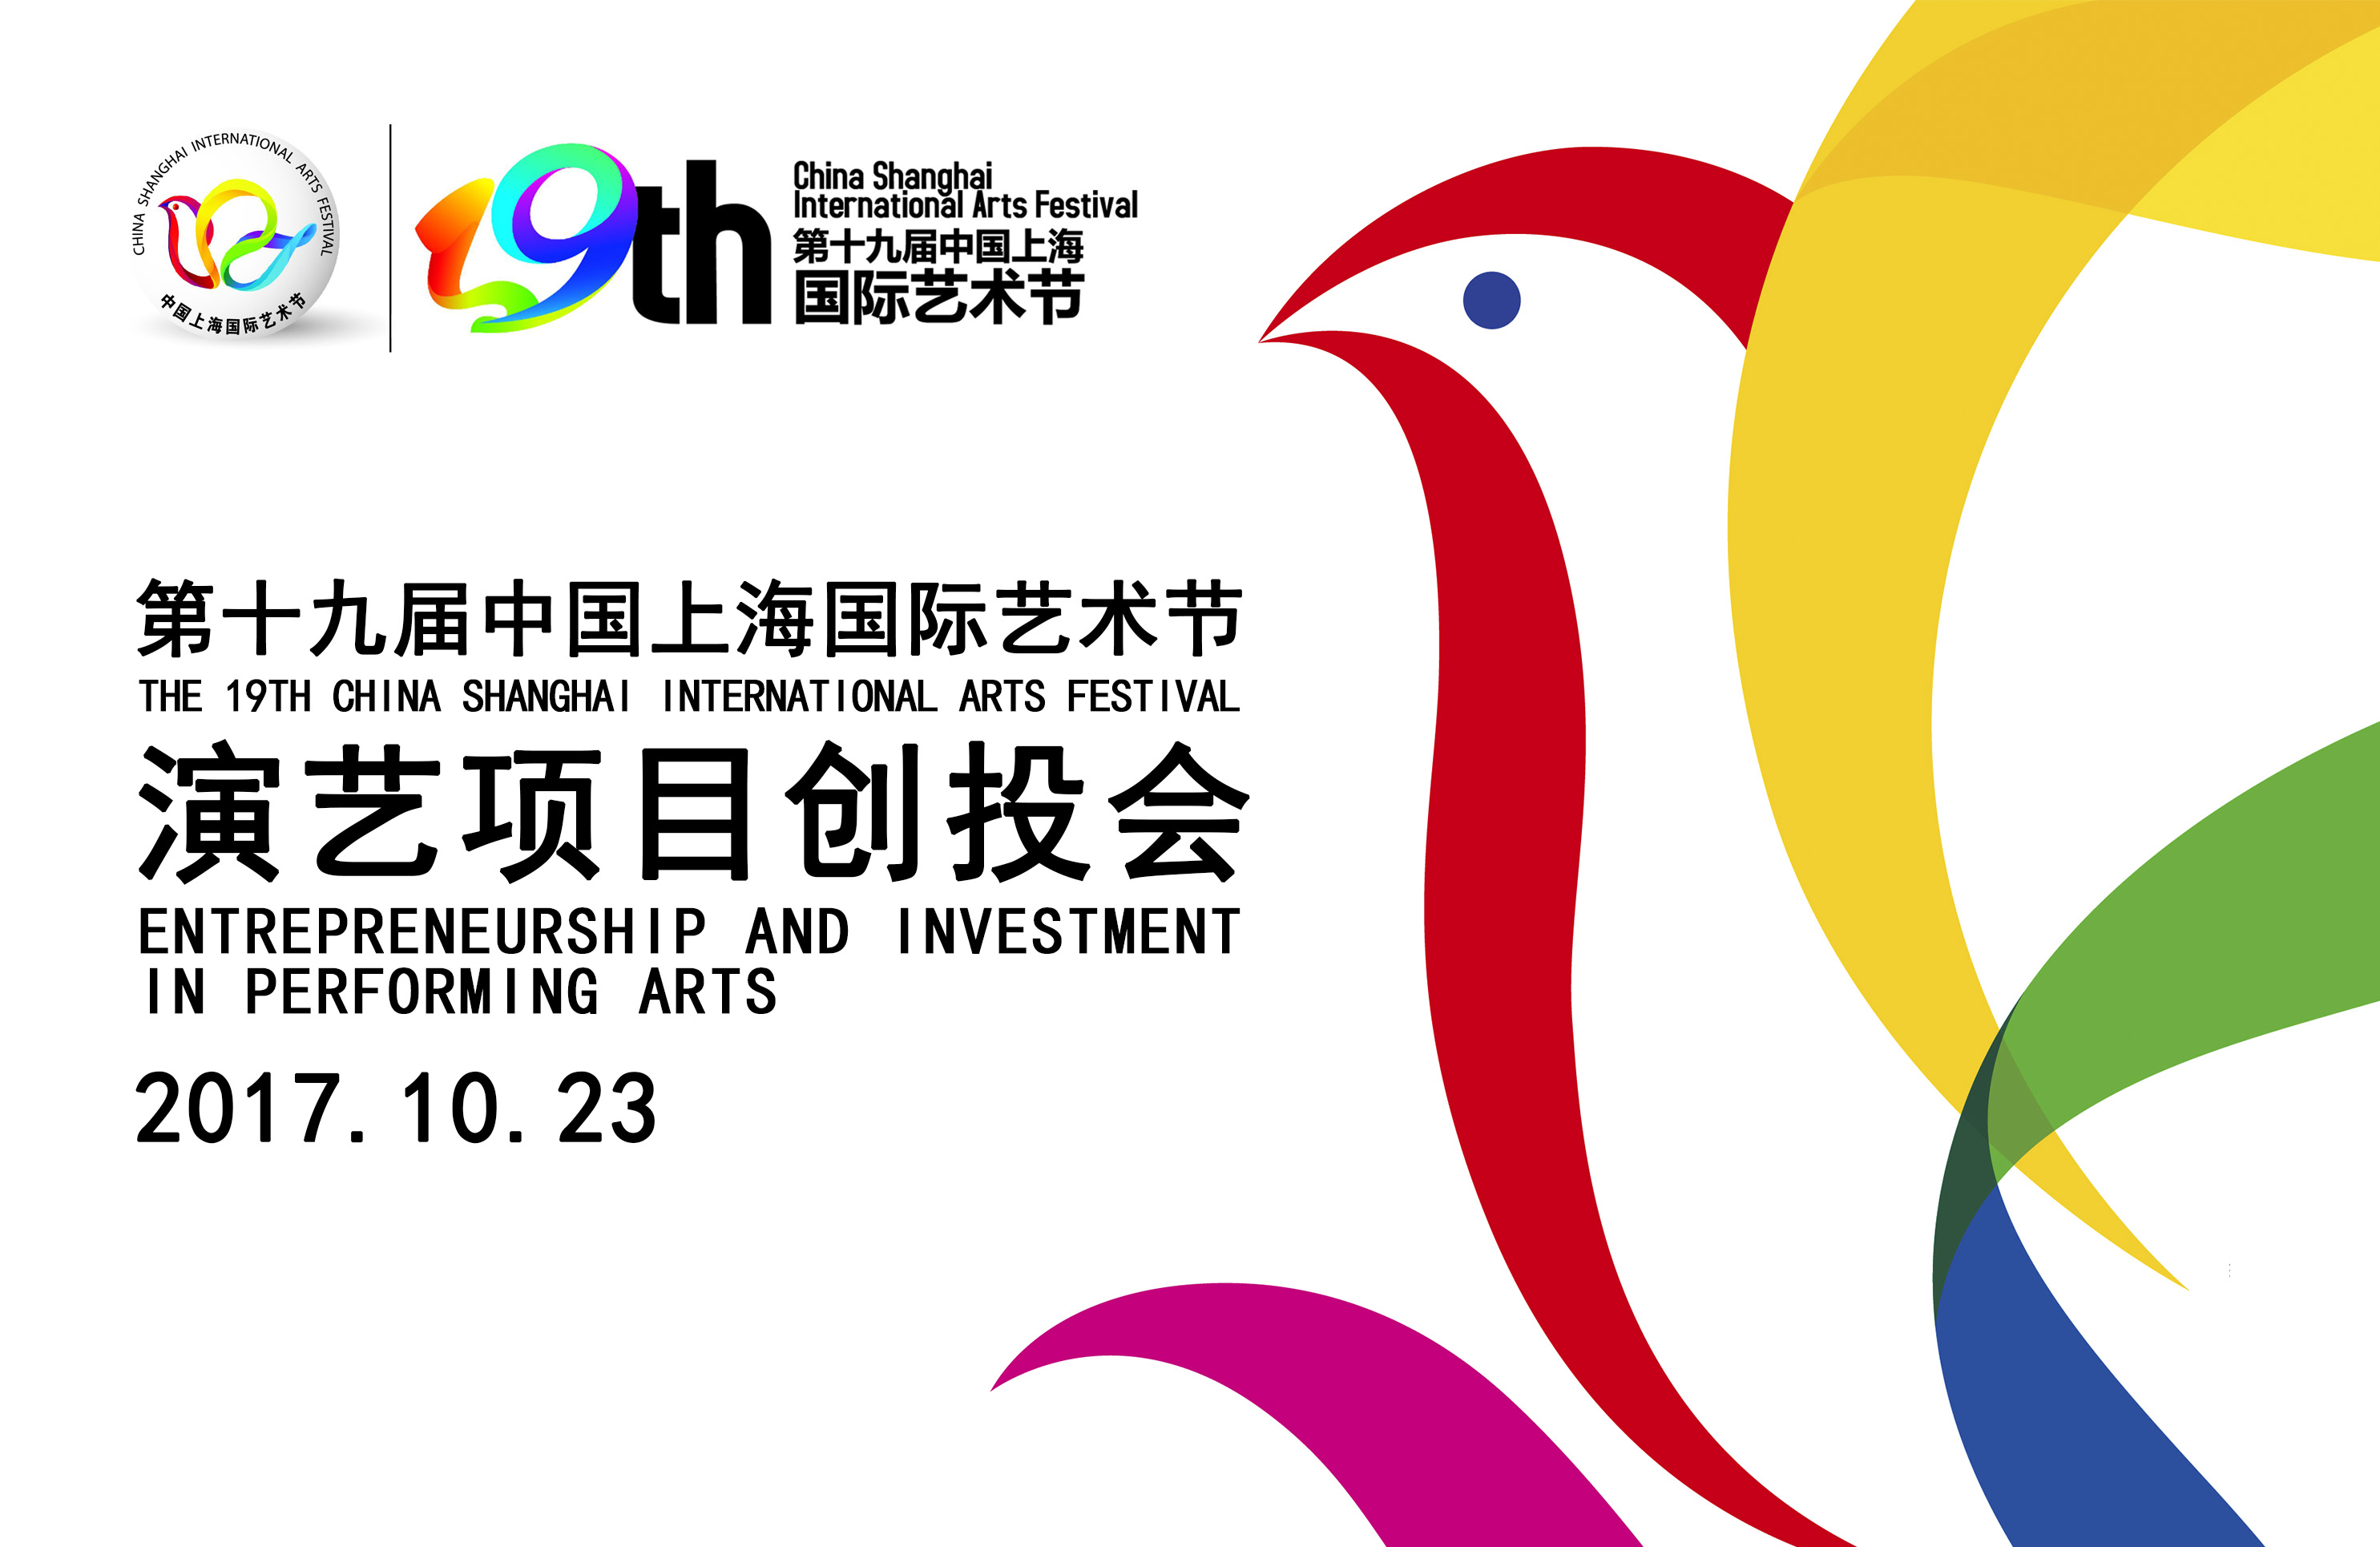 Agenda of the Festival Investment Session: Entrepreneurship and Investment in Performing Arts Industry